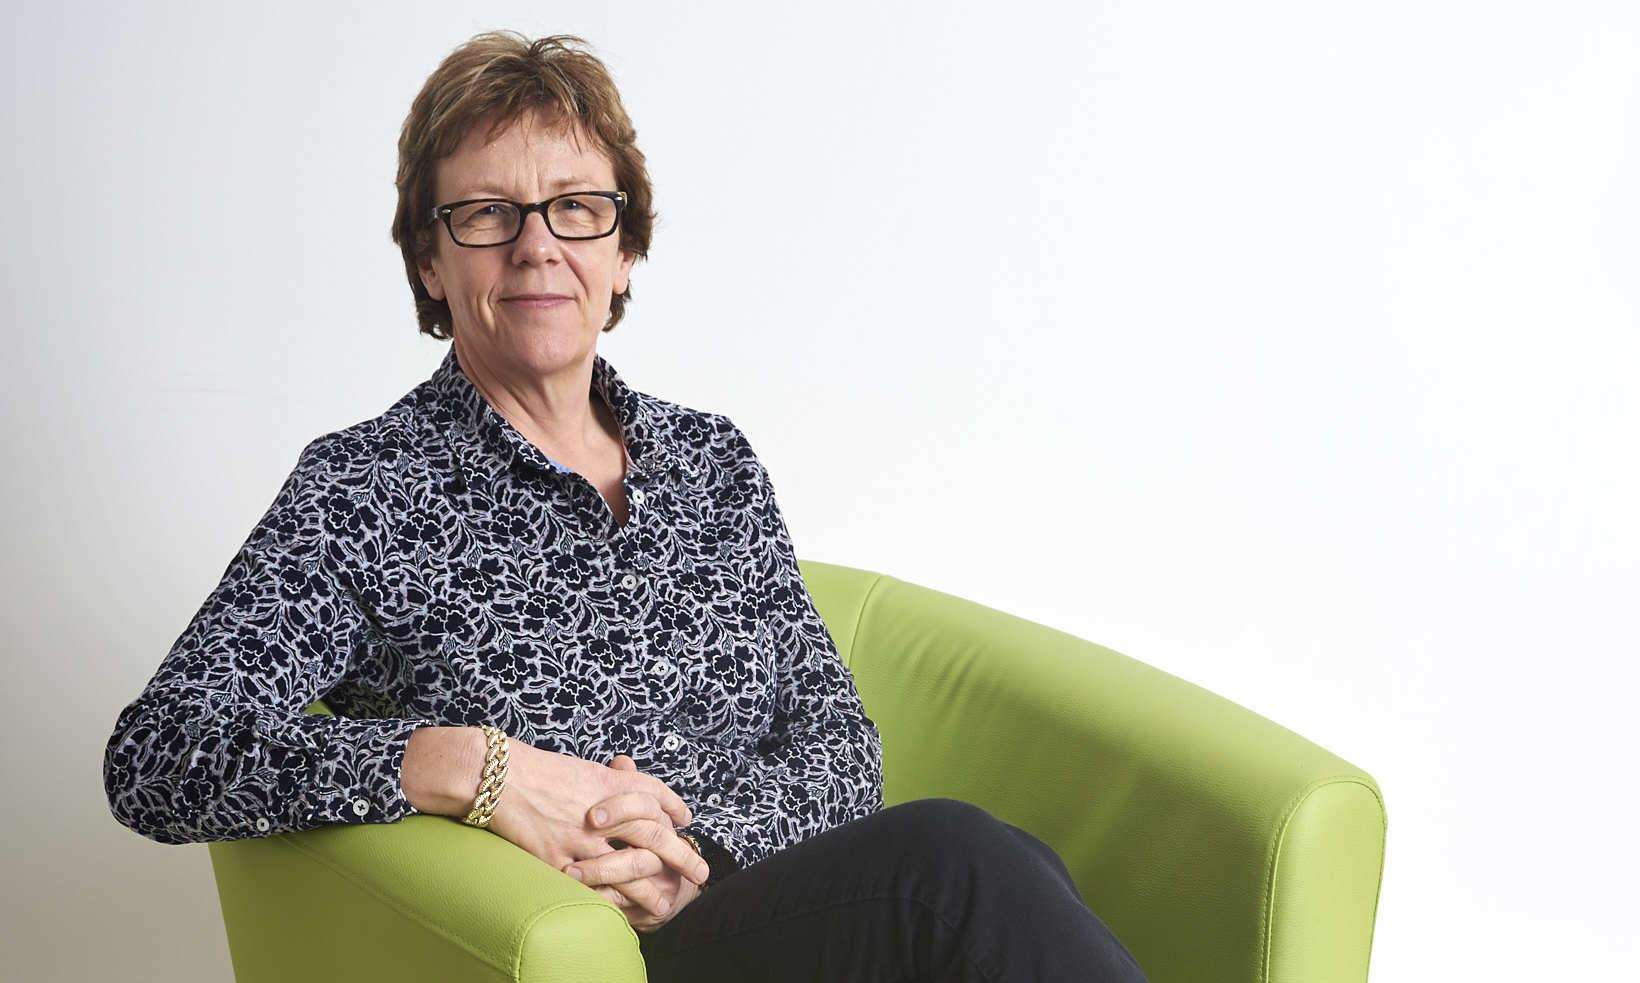 Sue Nelson and her staff at Ashford-based Breakthrough Funding have processed a total of 724 claims, gaining a grand total of £40,688,800 in tax relief or cash for clients across the UK.